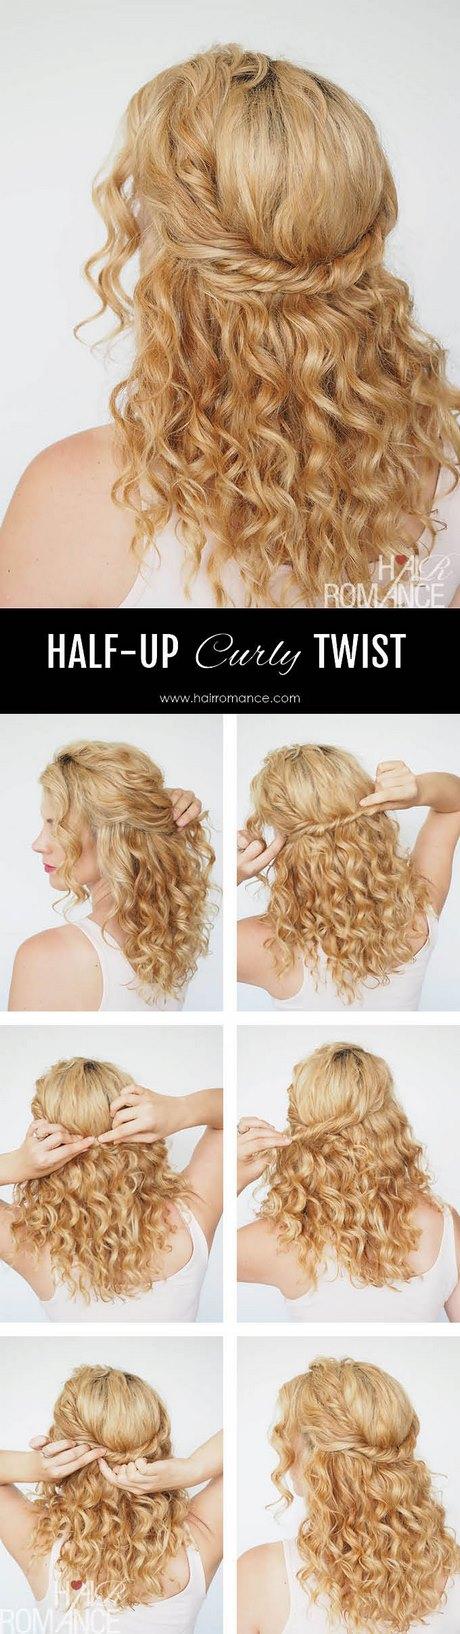 Quick half up hairstyles quick-half-up-hairstyles-72_14